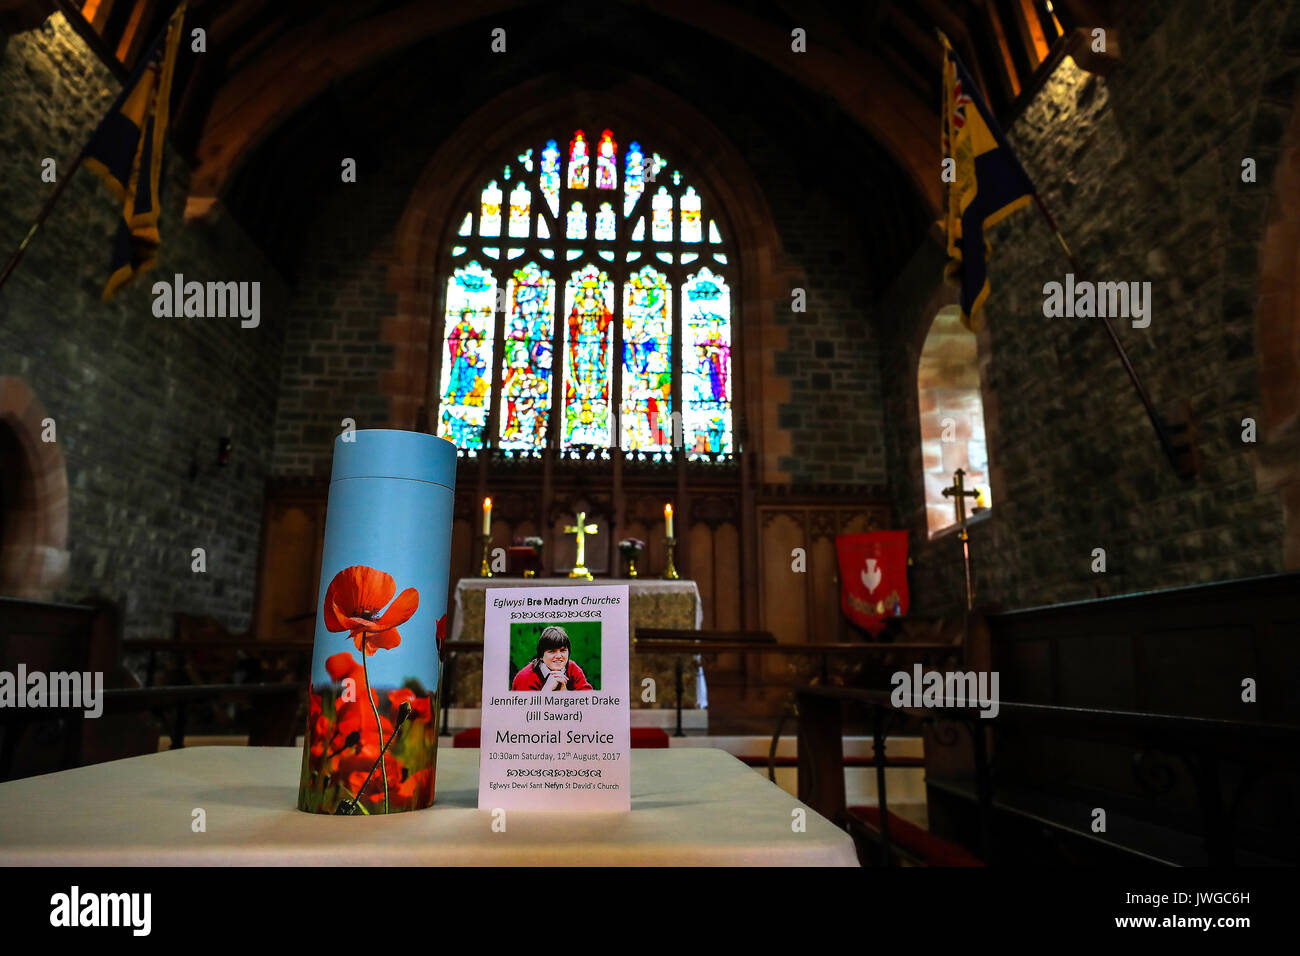 A container holding the ashes of Jill Saward inside St David's Church in Gwynedd, north-west Wales, ahead of a memorial service for the victims' rights campaigner. Stock Photo